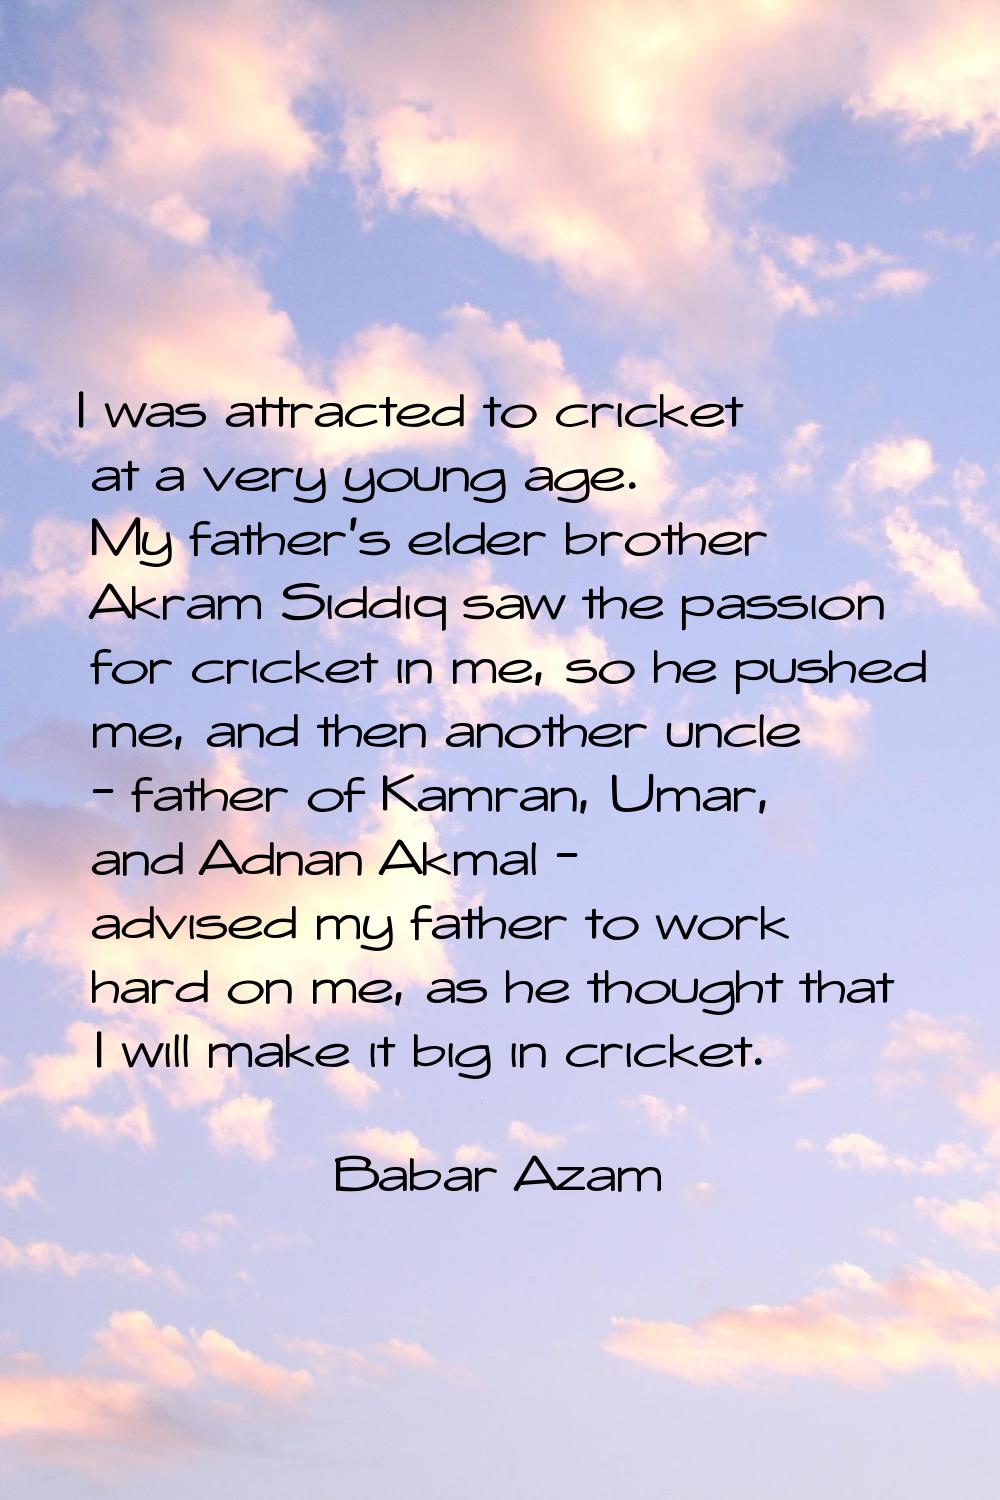 I was attracted to cricket at a very young age. My father's elder brother Akram Siddiq saw the pass